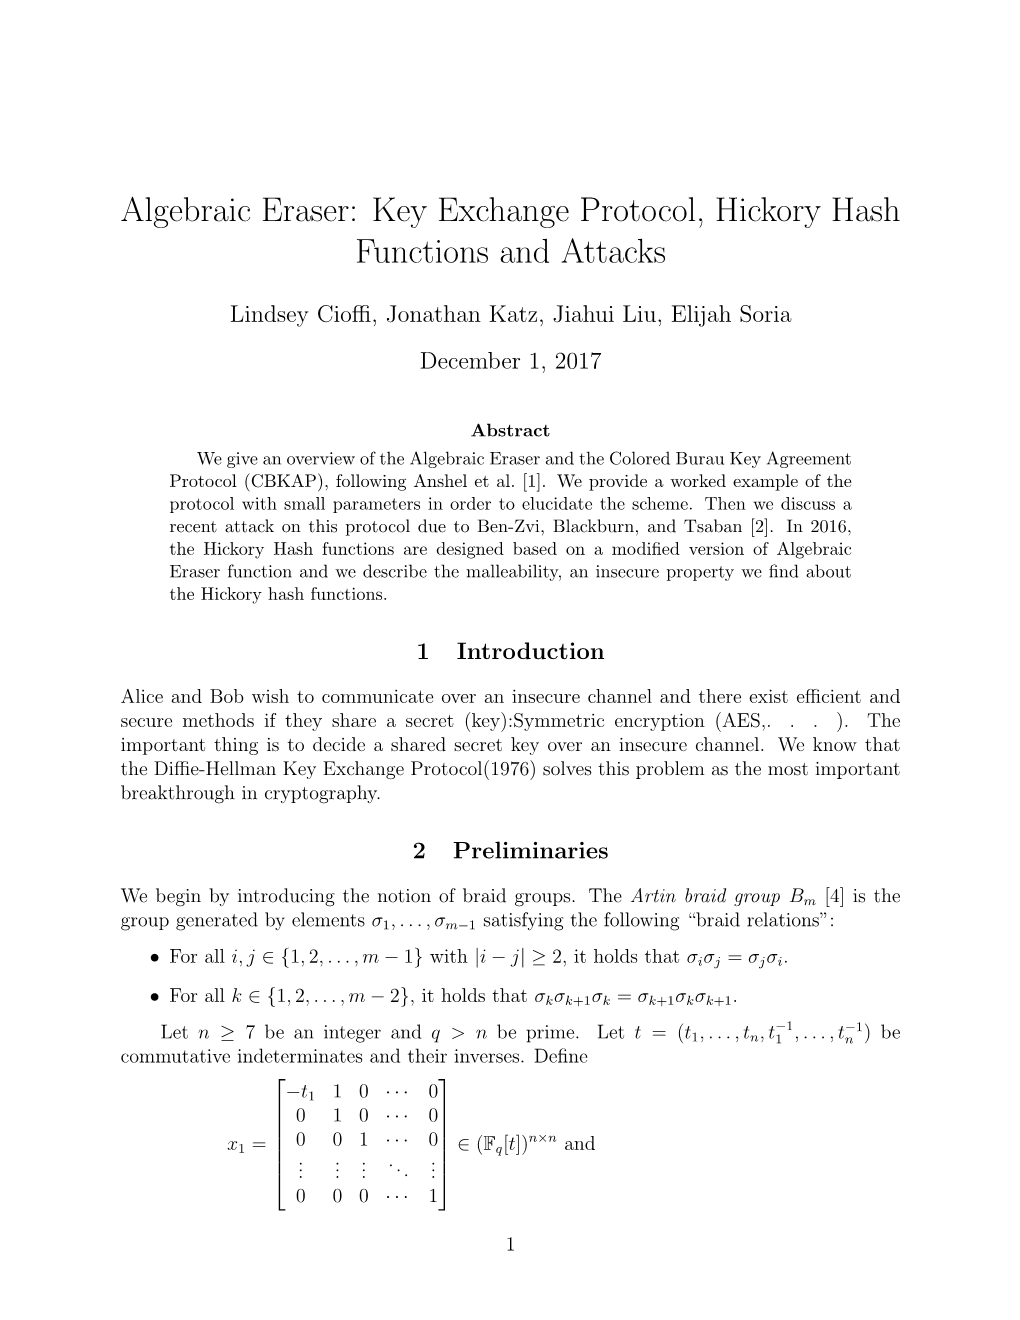 Algebraic Eraser: Key Exchange Protocol, Hickory Hash Functions and Attacks